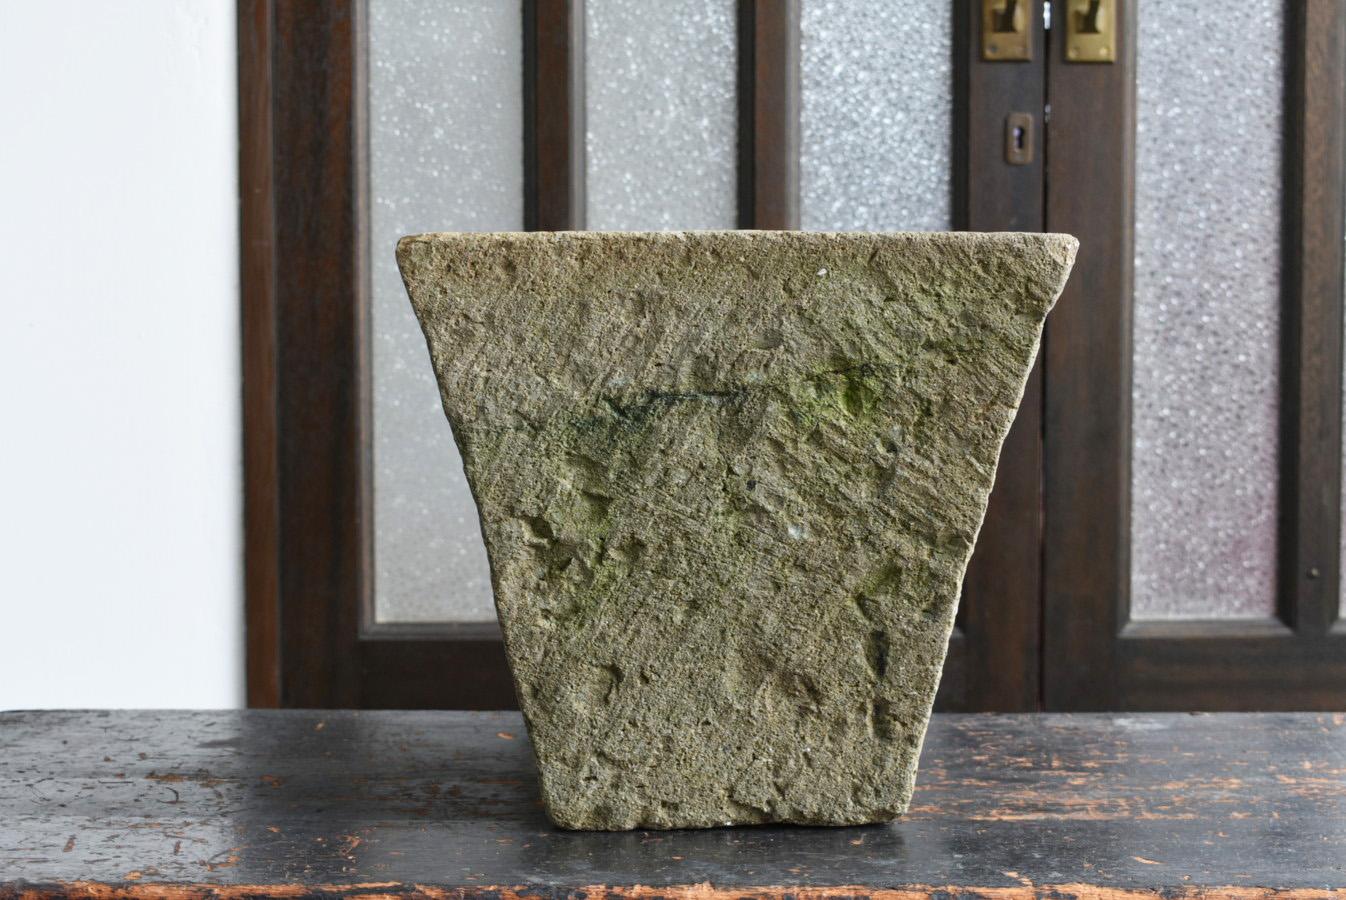 There is a culture in Japan that makes gardens beautiful.
It is this stone that is placed in the place where visitors wash their hands.
It is called 